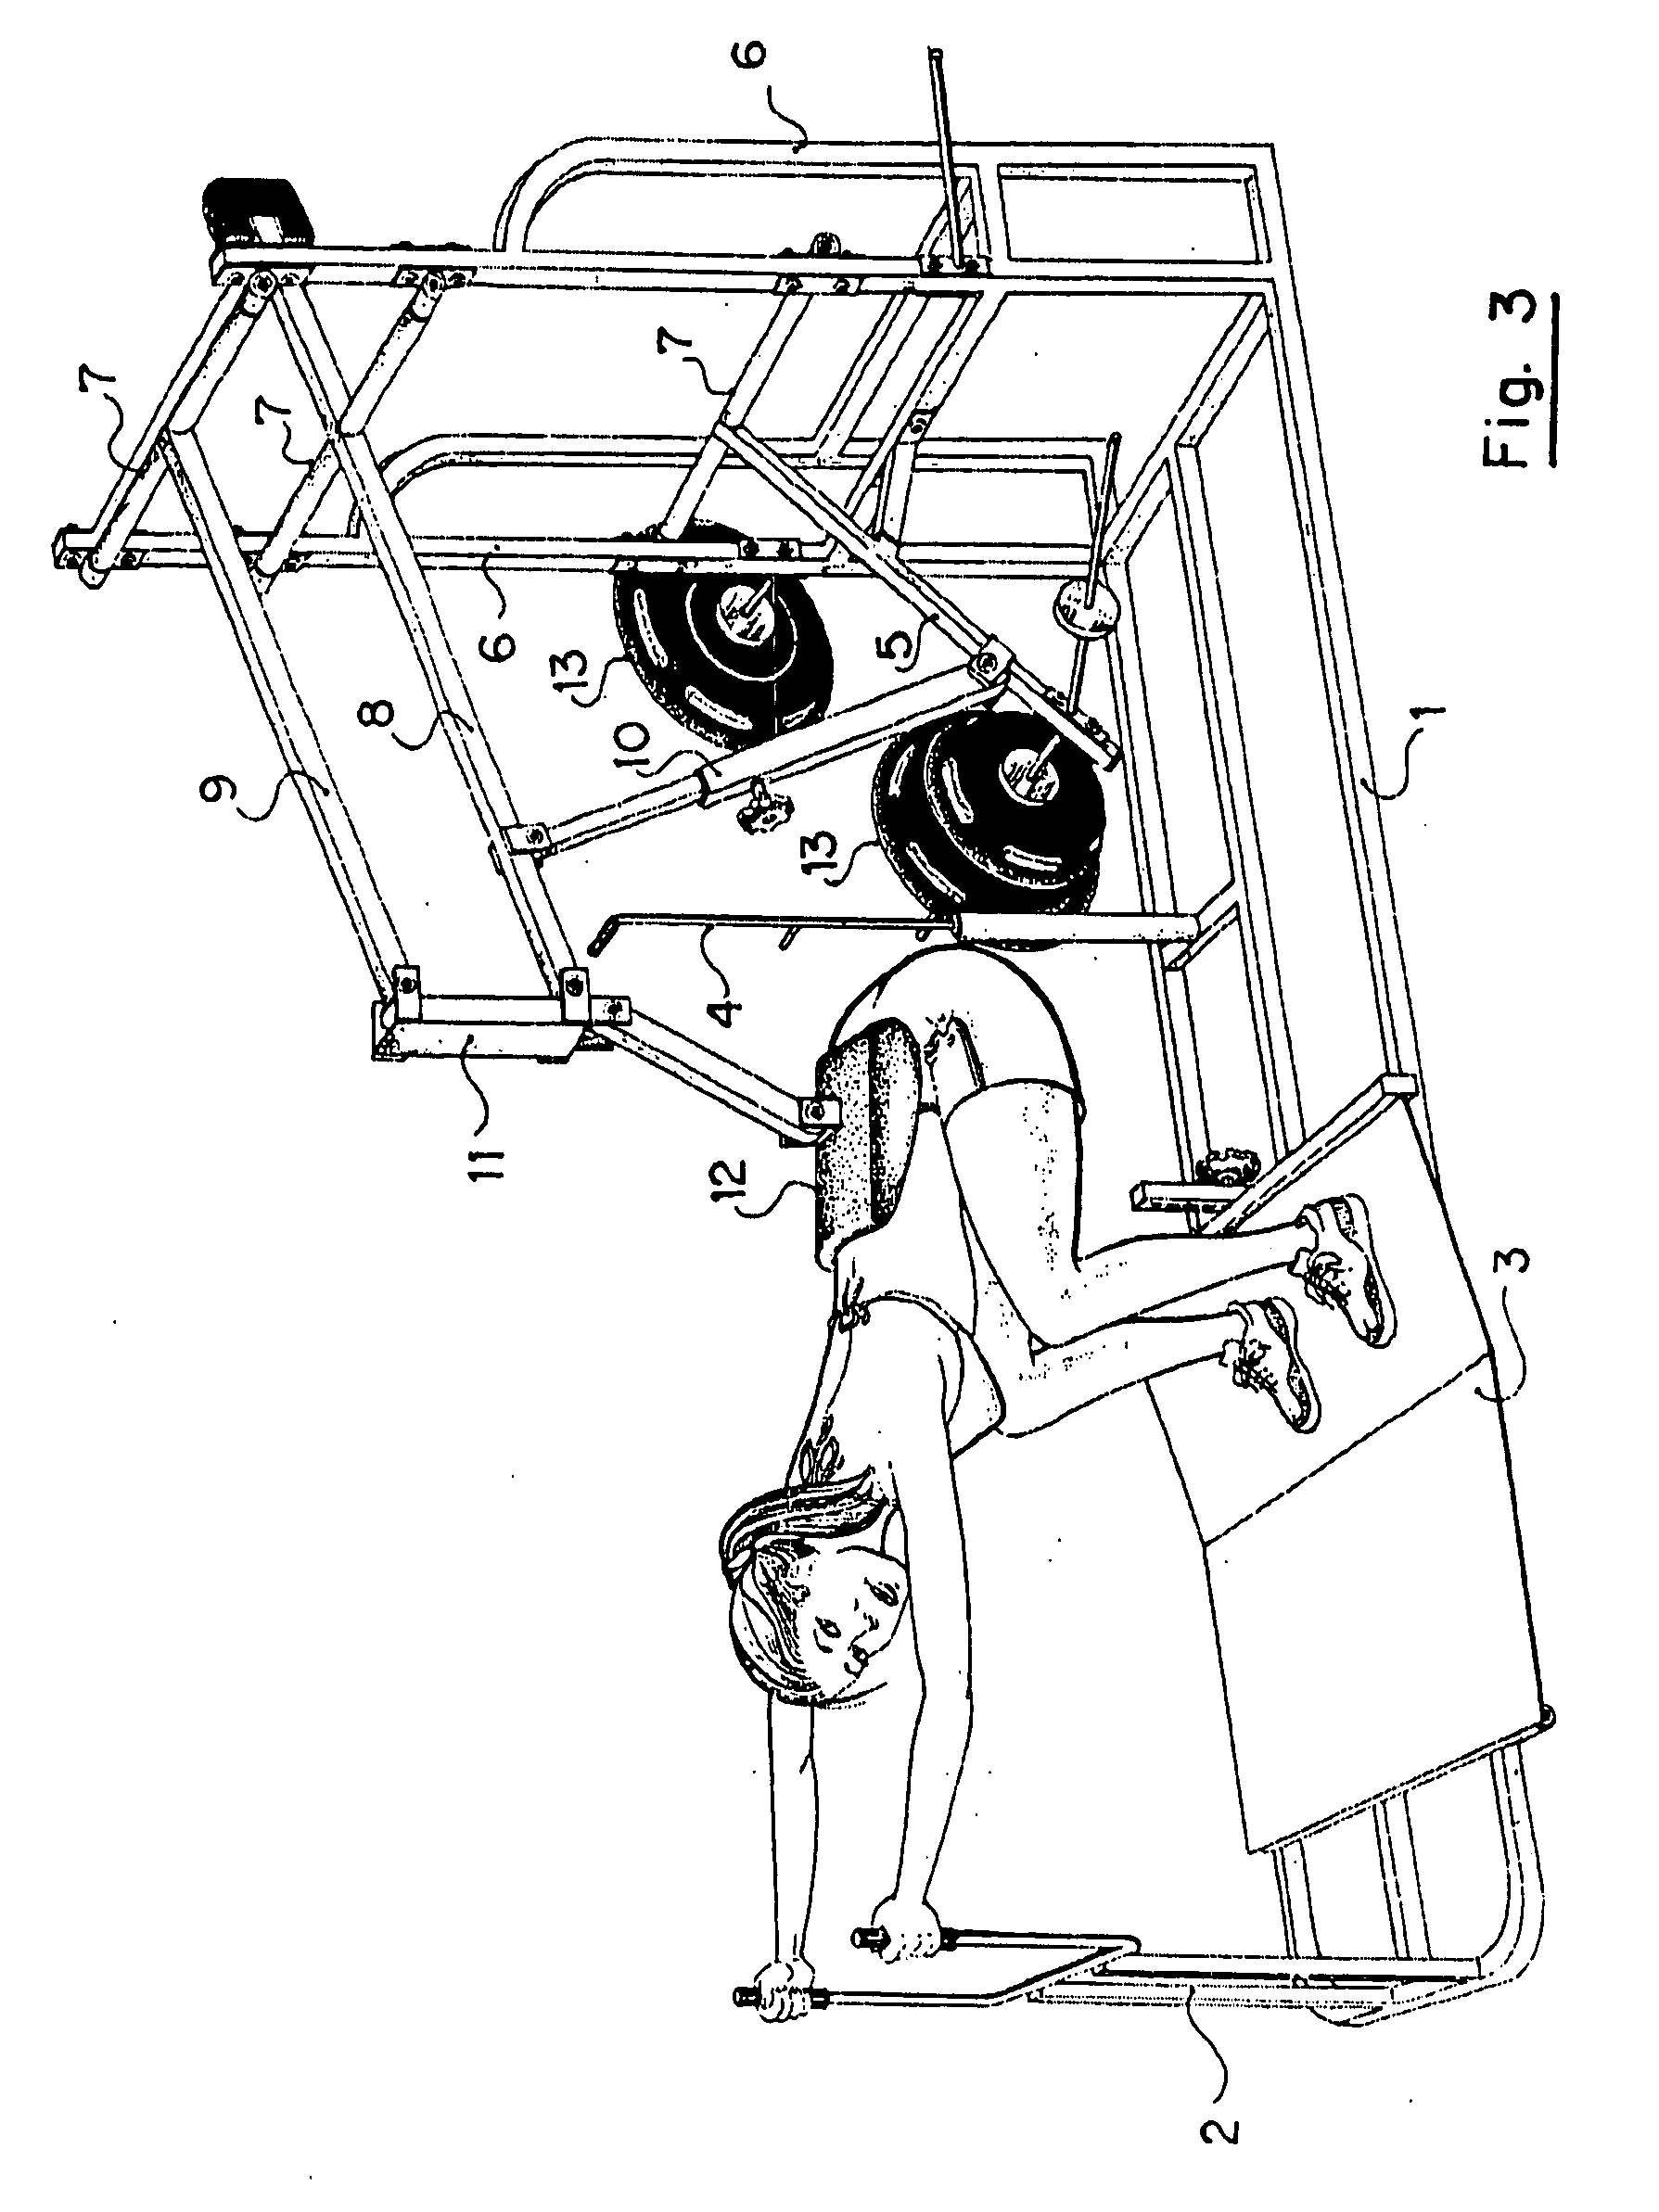 Squatting apparatus without spinal column compression